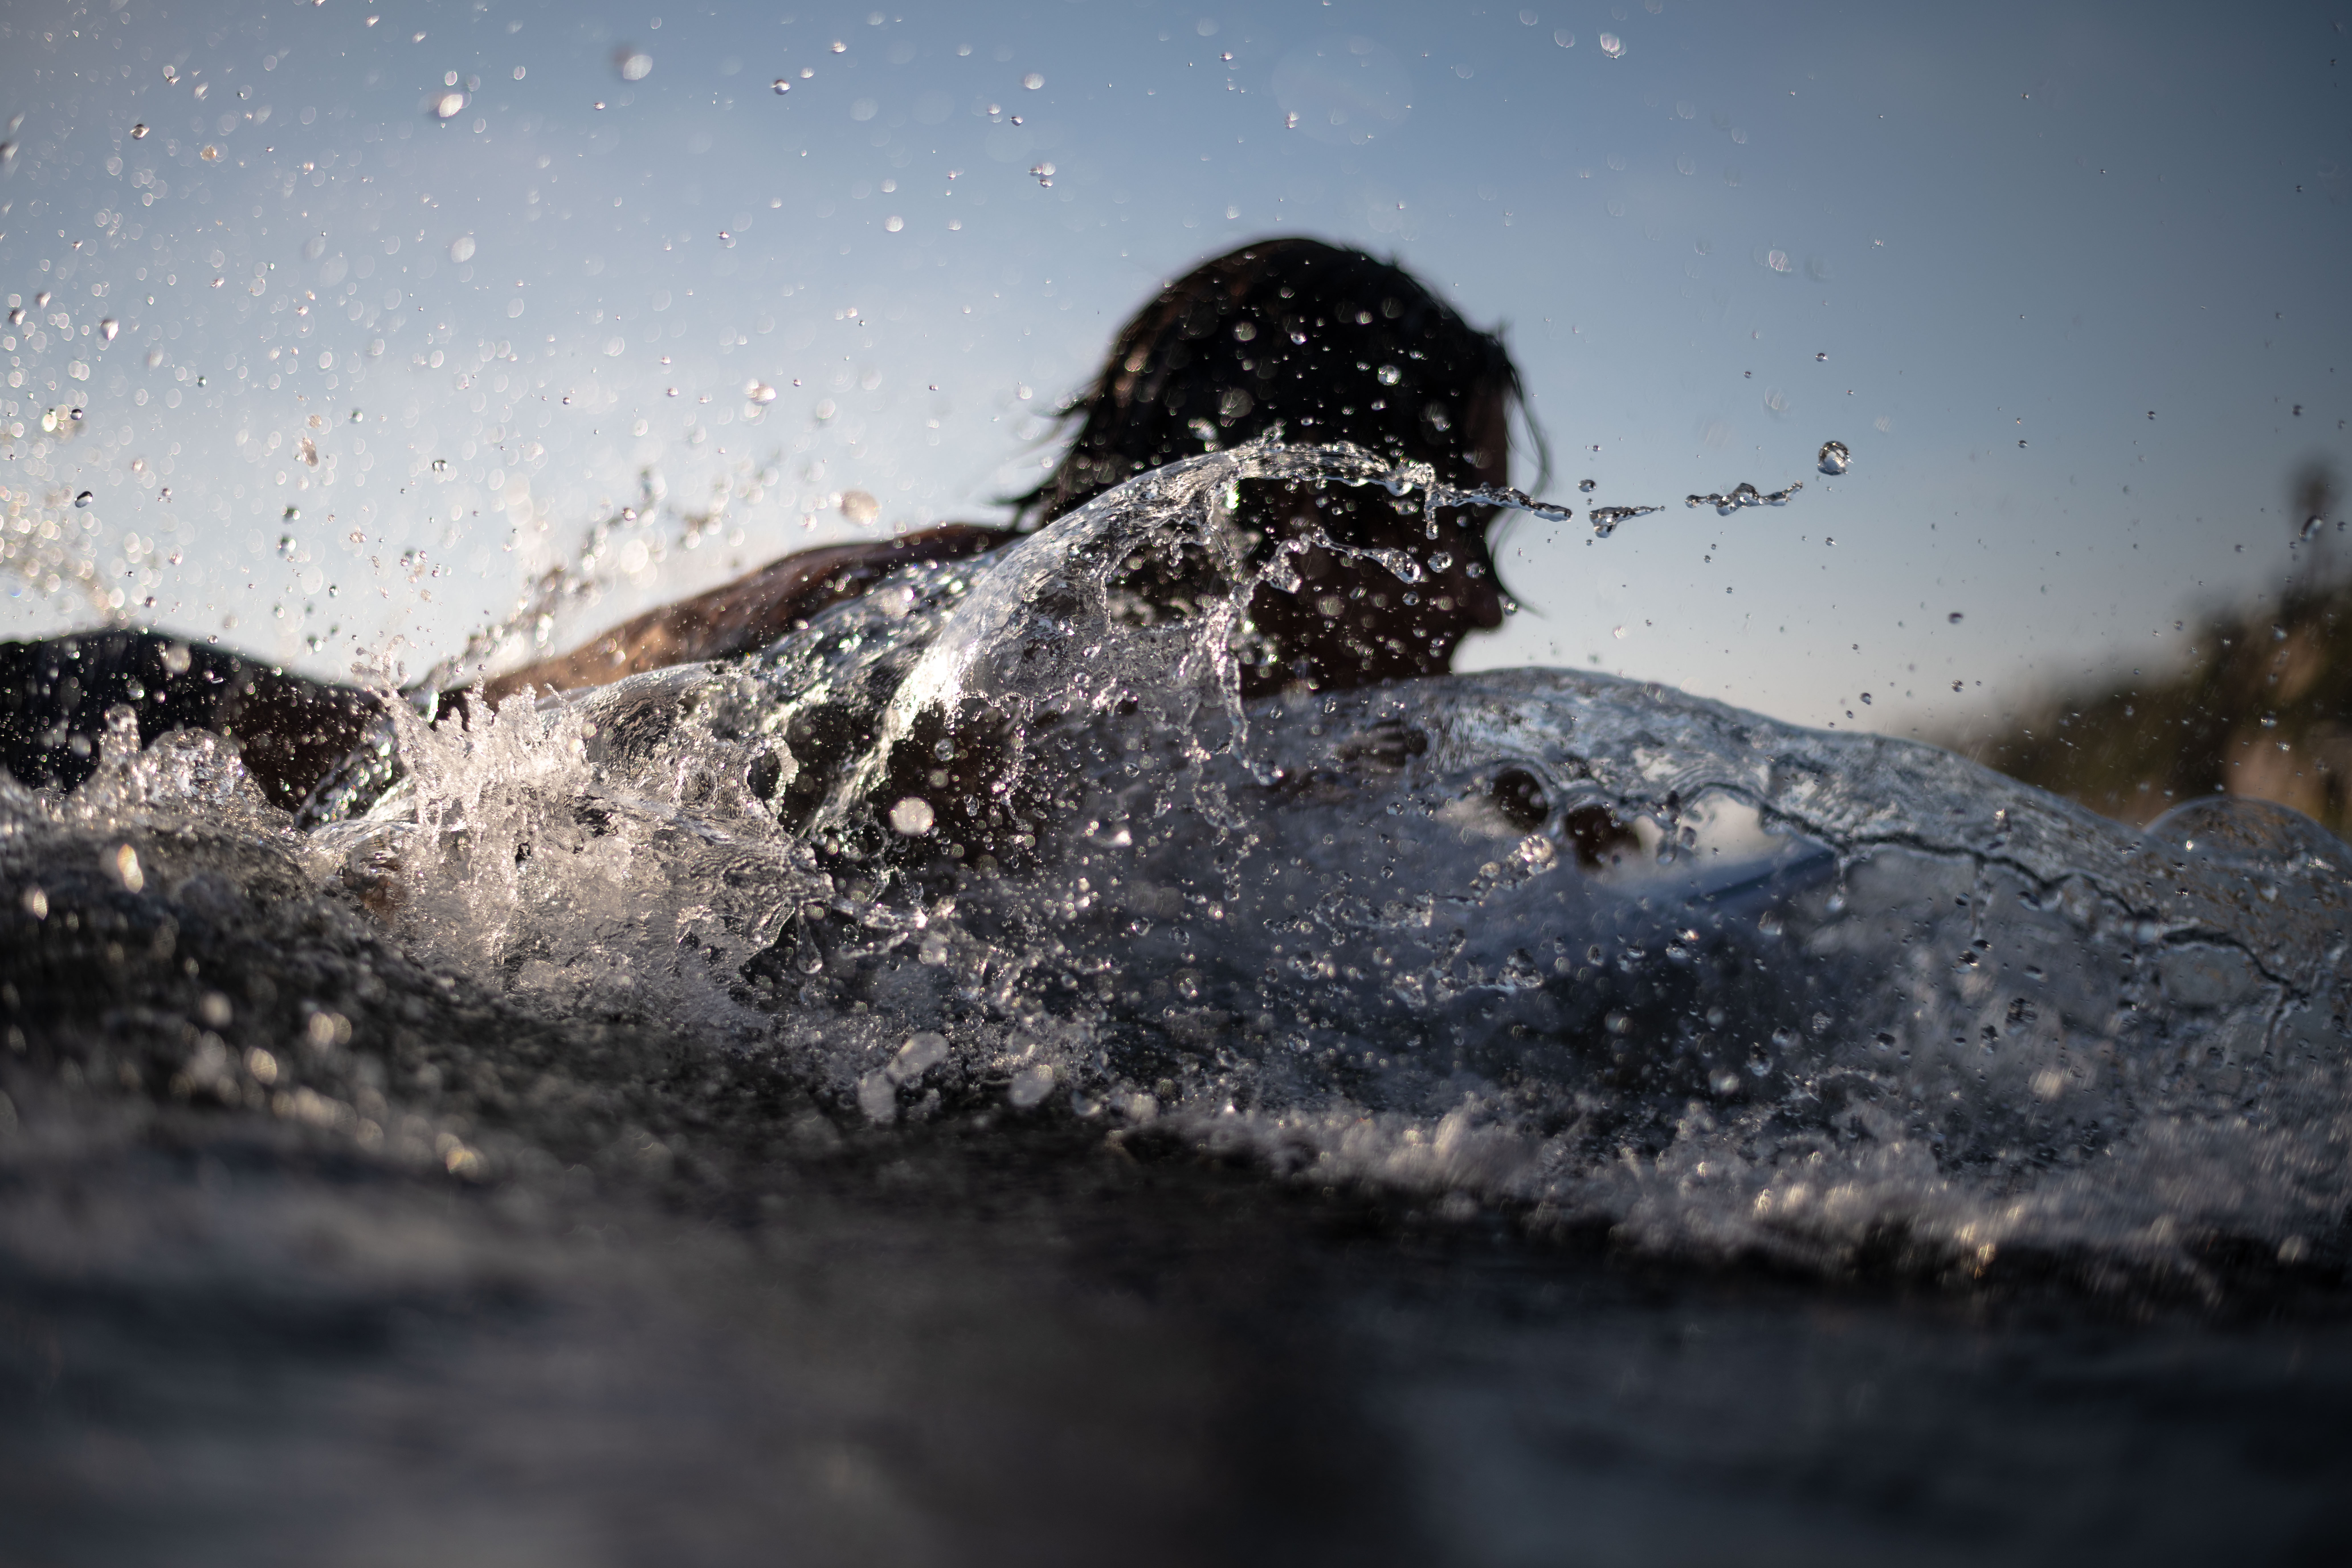 photo of streaking water as a surfer paddles into a wave at Beacons Beach. shot from a in water perspective using my Nikon camera and Aquatech waterproof housing.